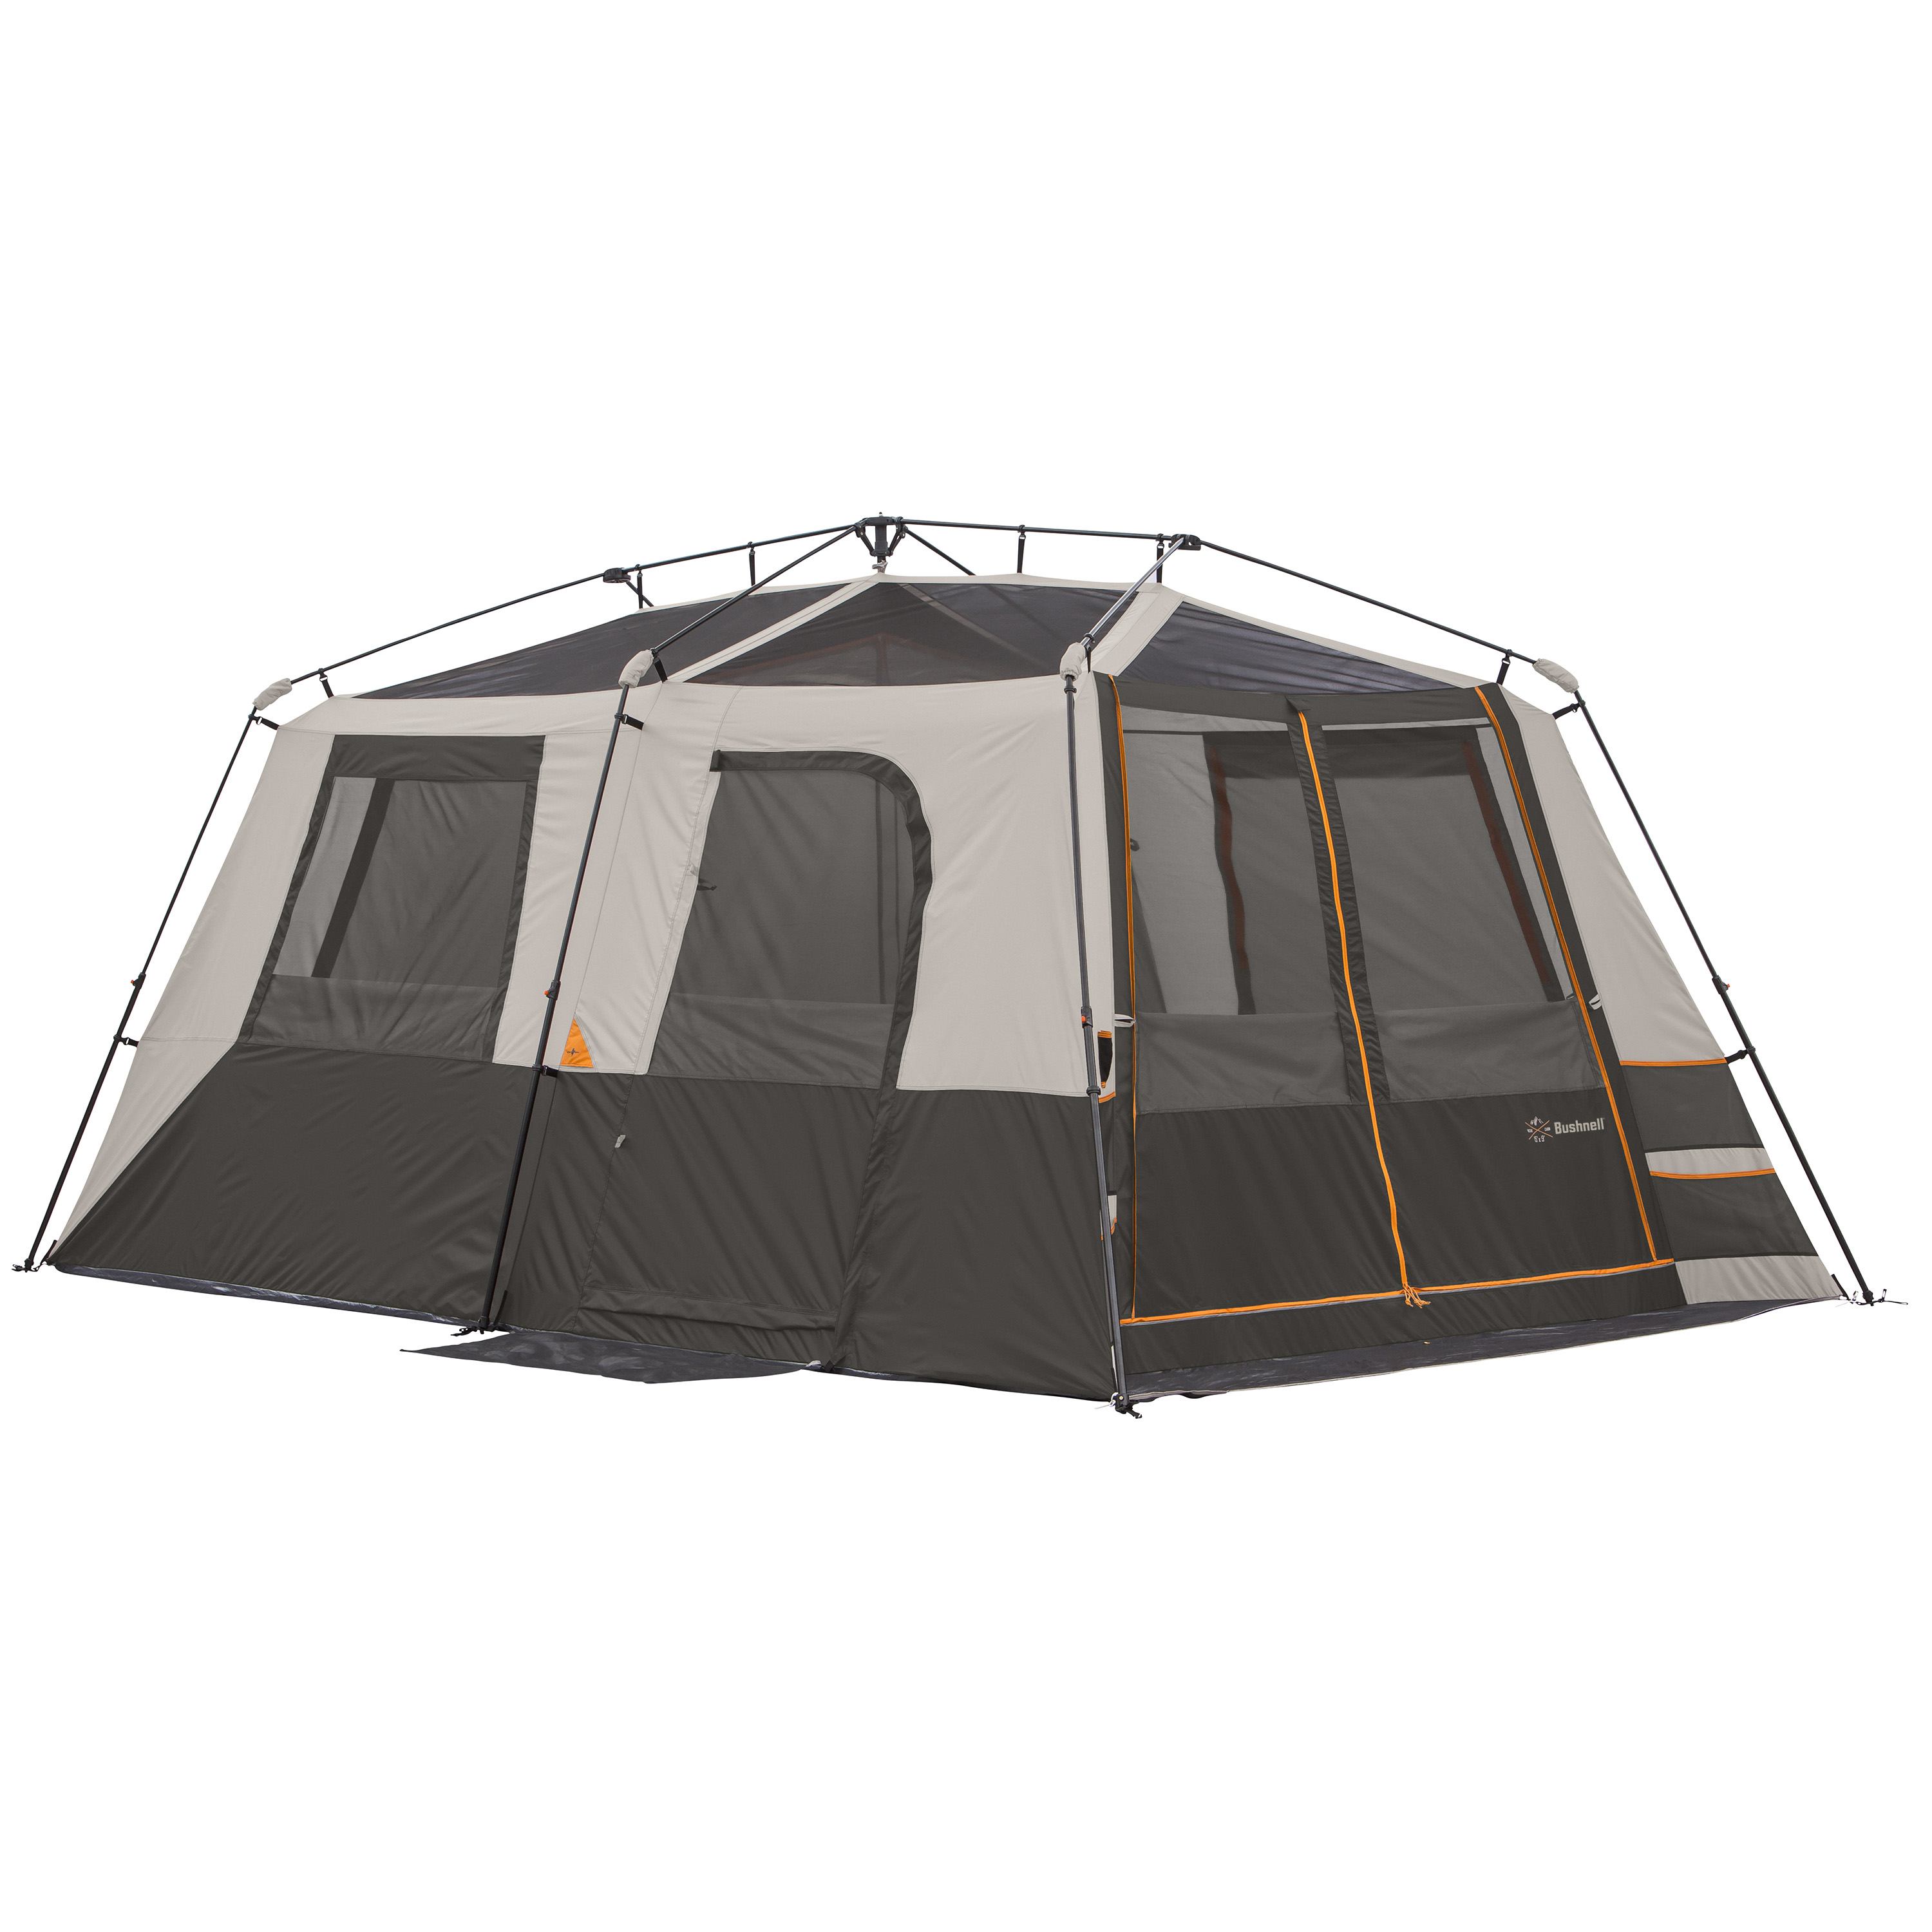 Bushnell Shield Series 9 Person Instant Cabin Tent - image 2 of 9